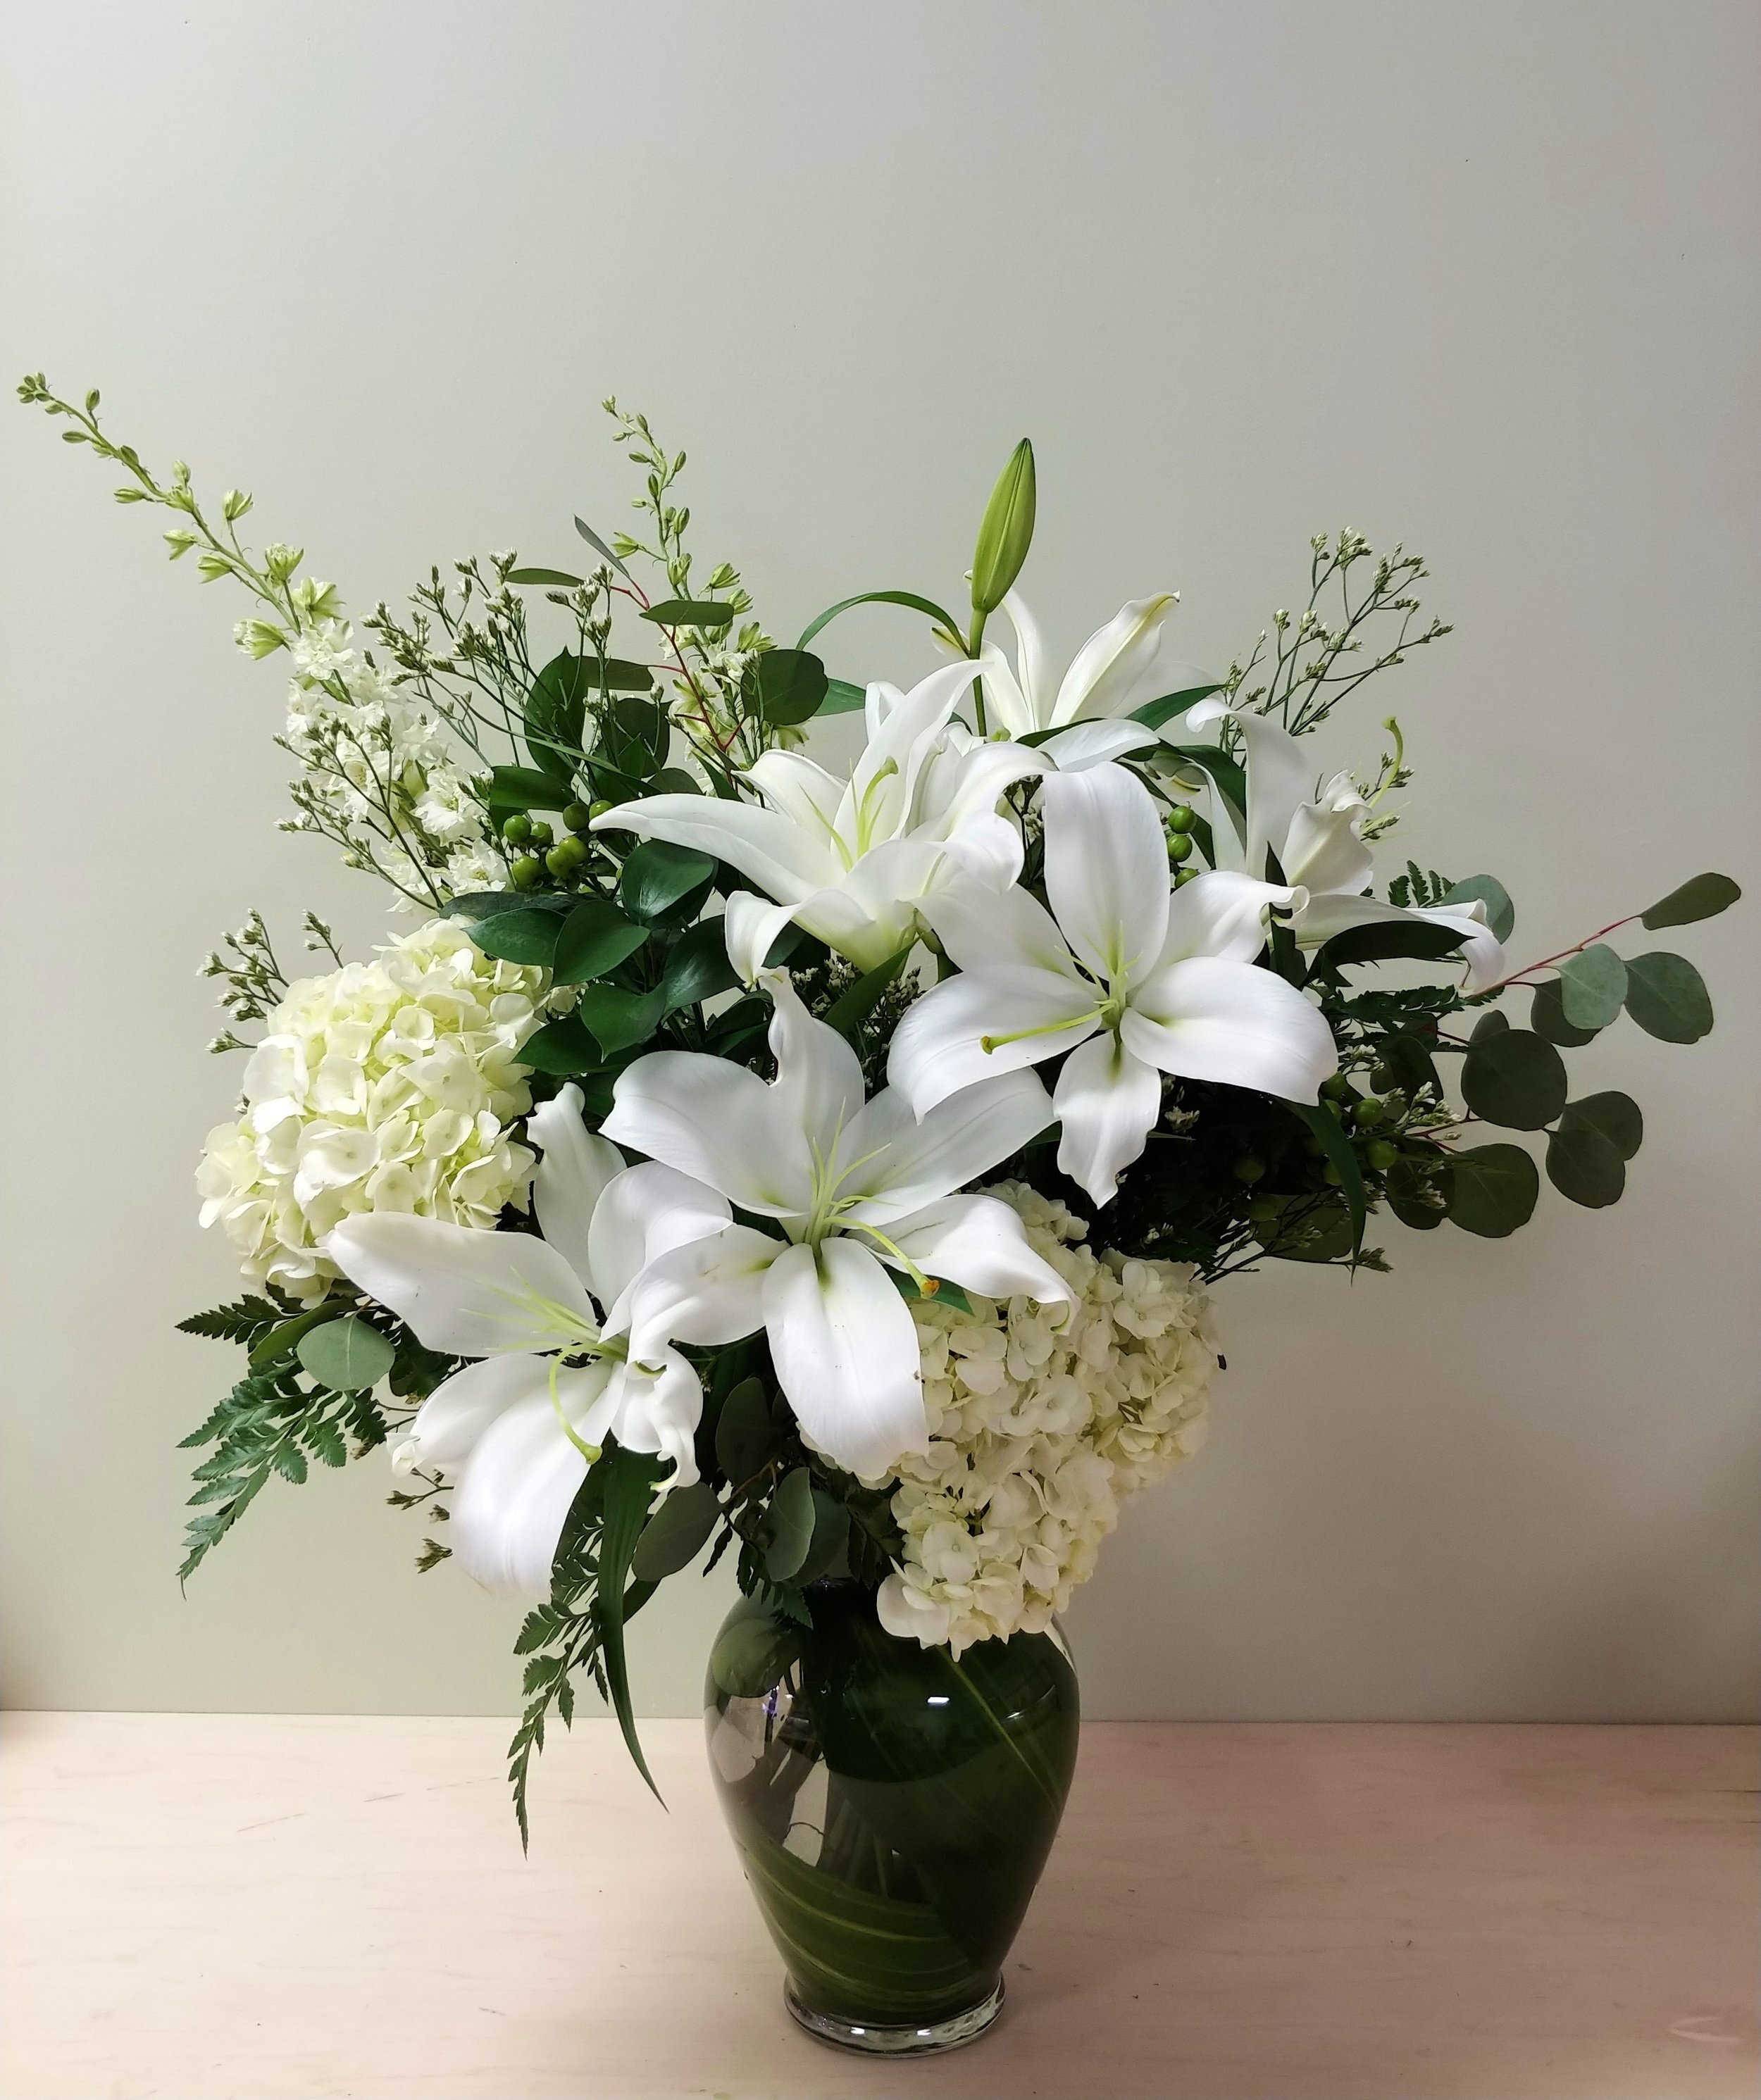 $100 Classic White and Green Lily Vase